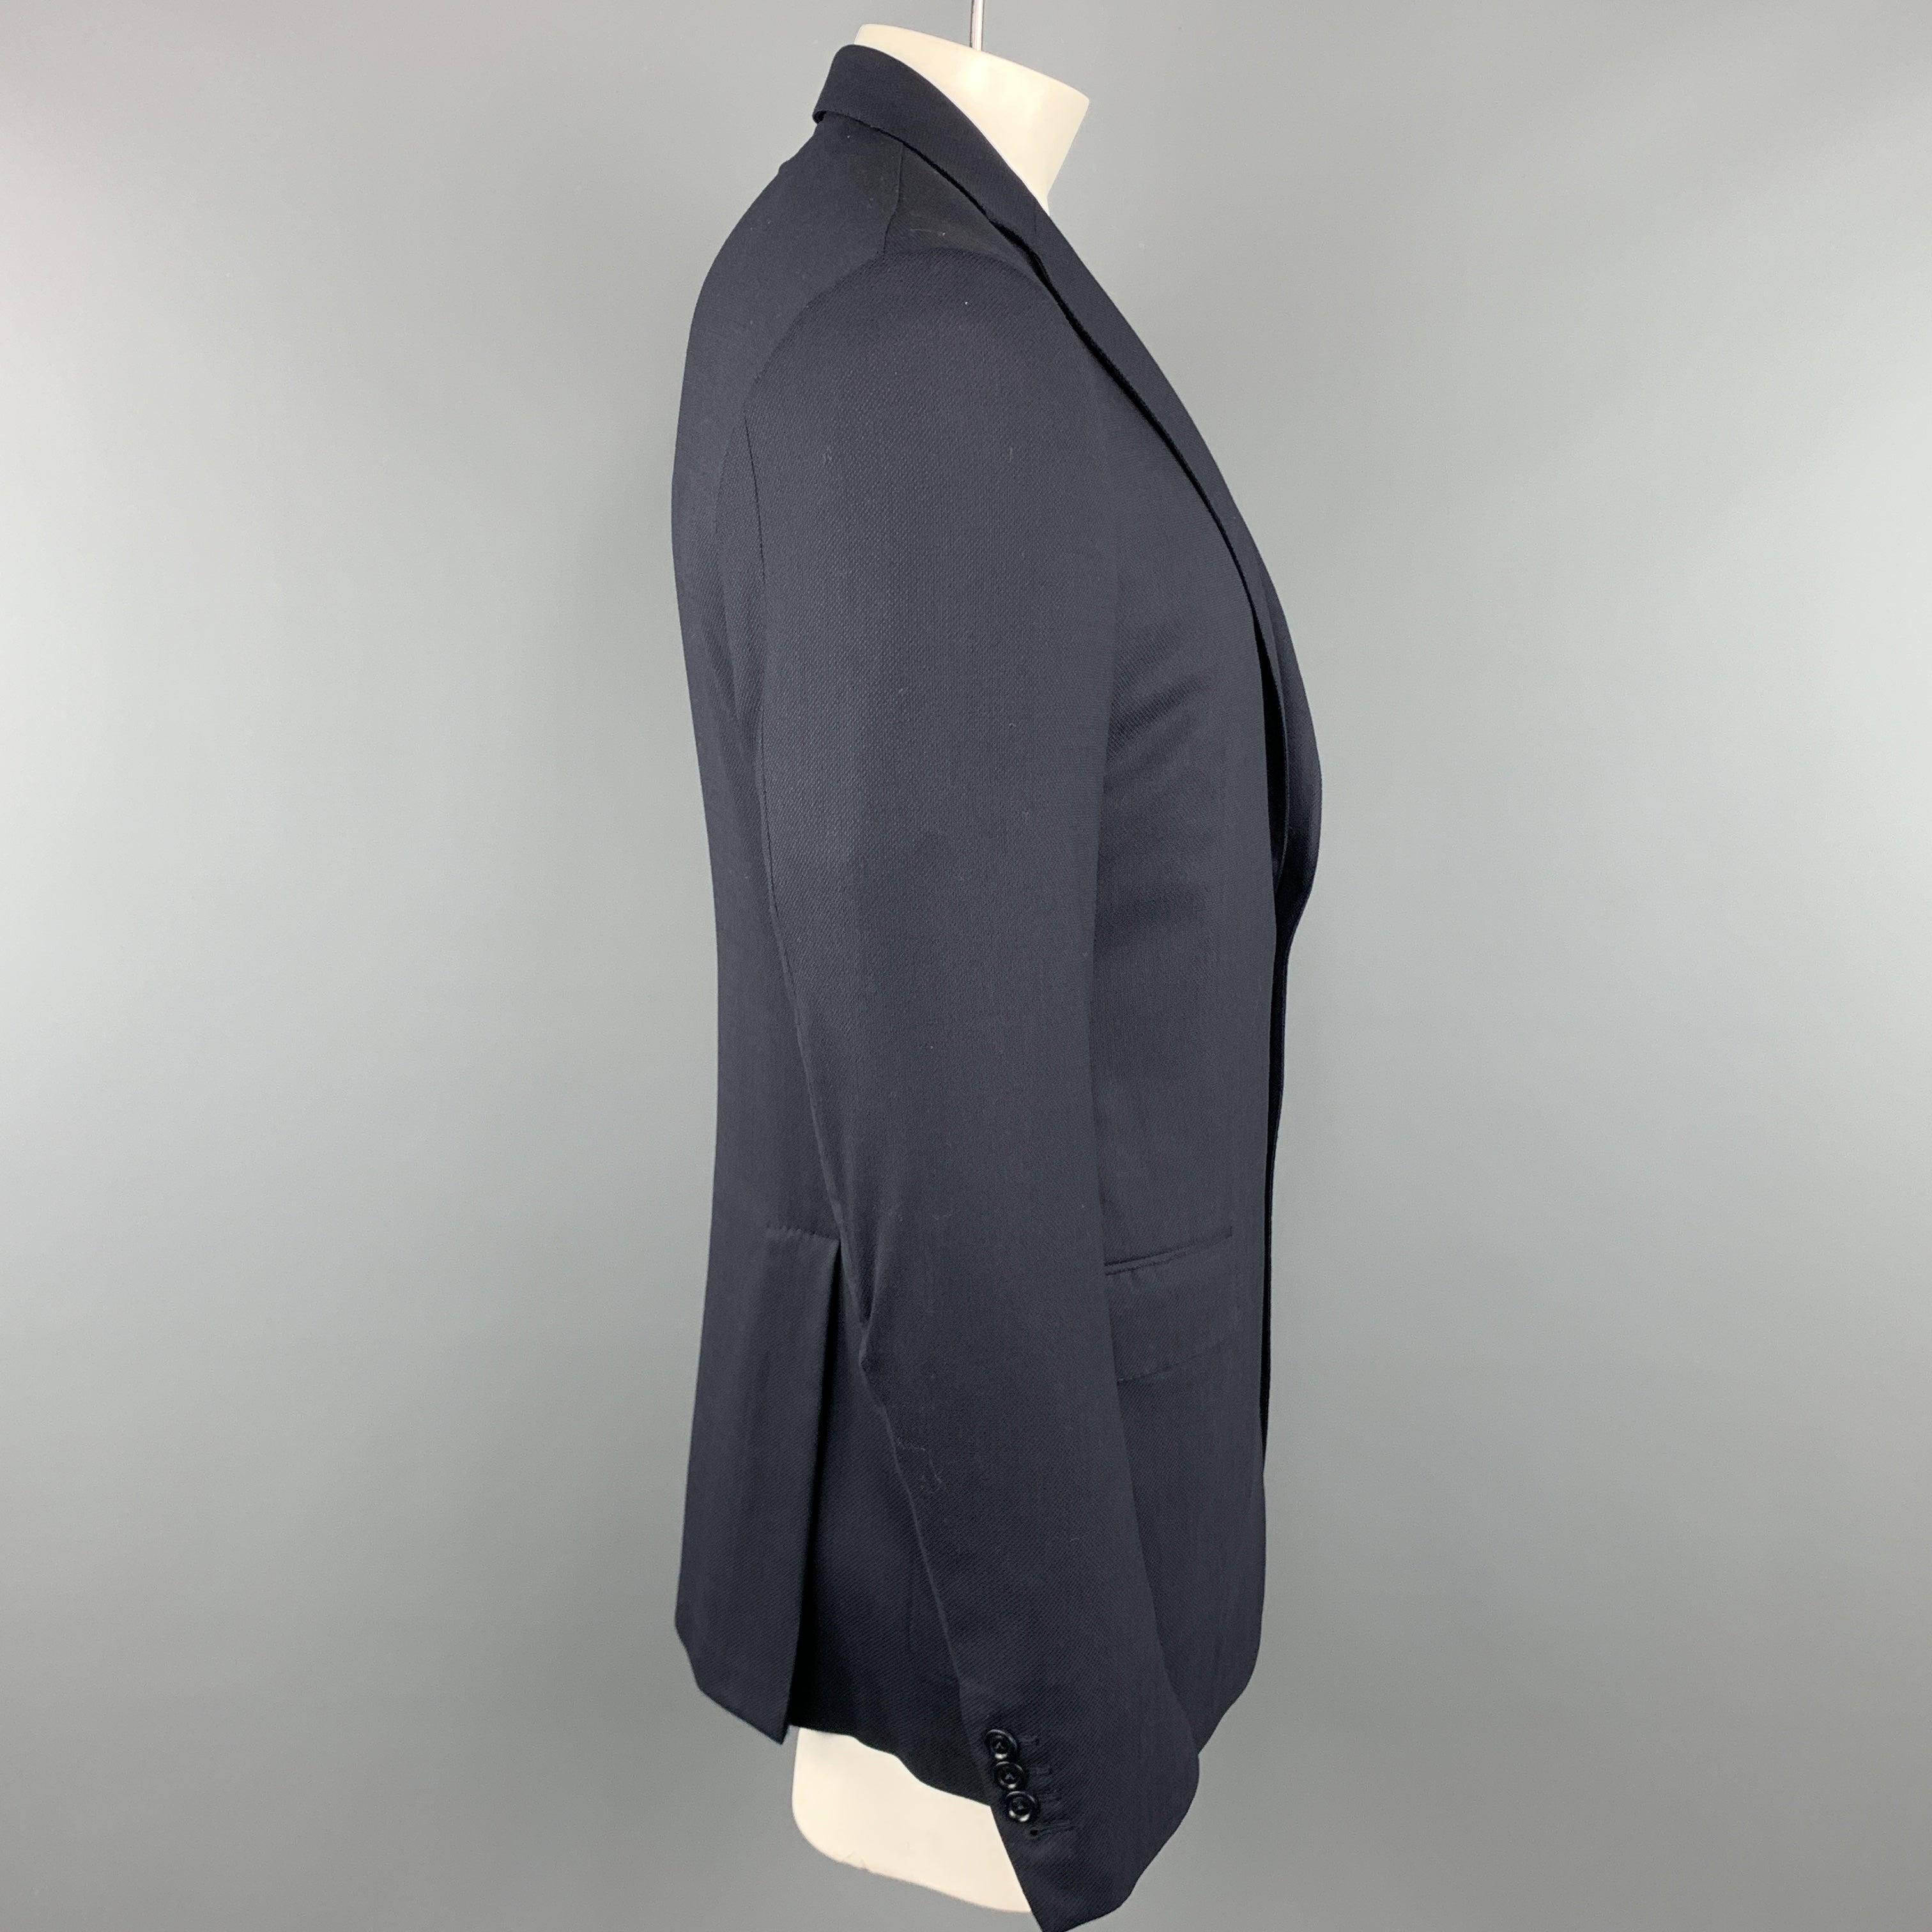 ERMENEGILDO ZEGNA Size 42 Long Navy Solid Wool Notch Lapel Sport Coat In Excellent Condition For Sale In San Francisco, CA